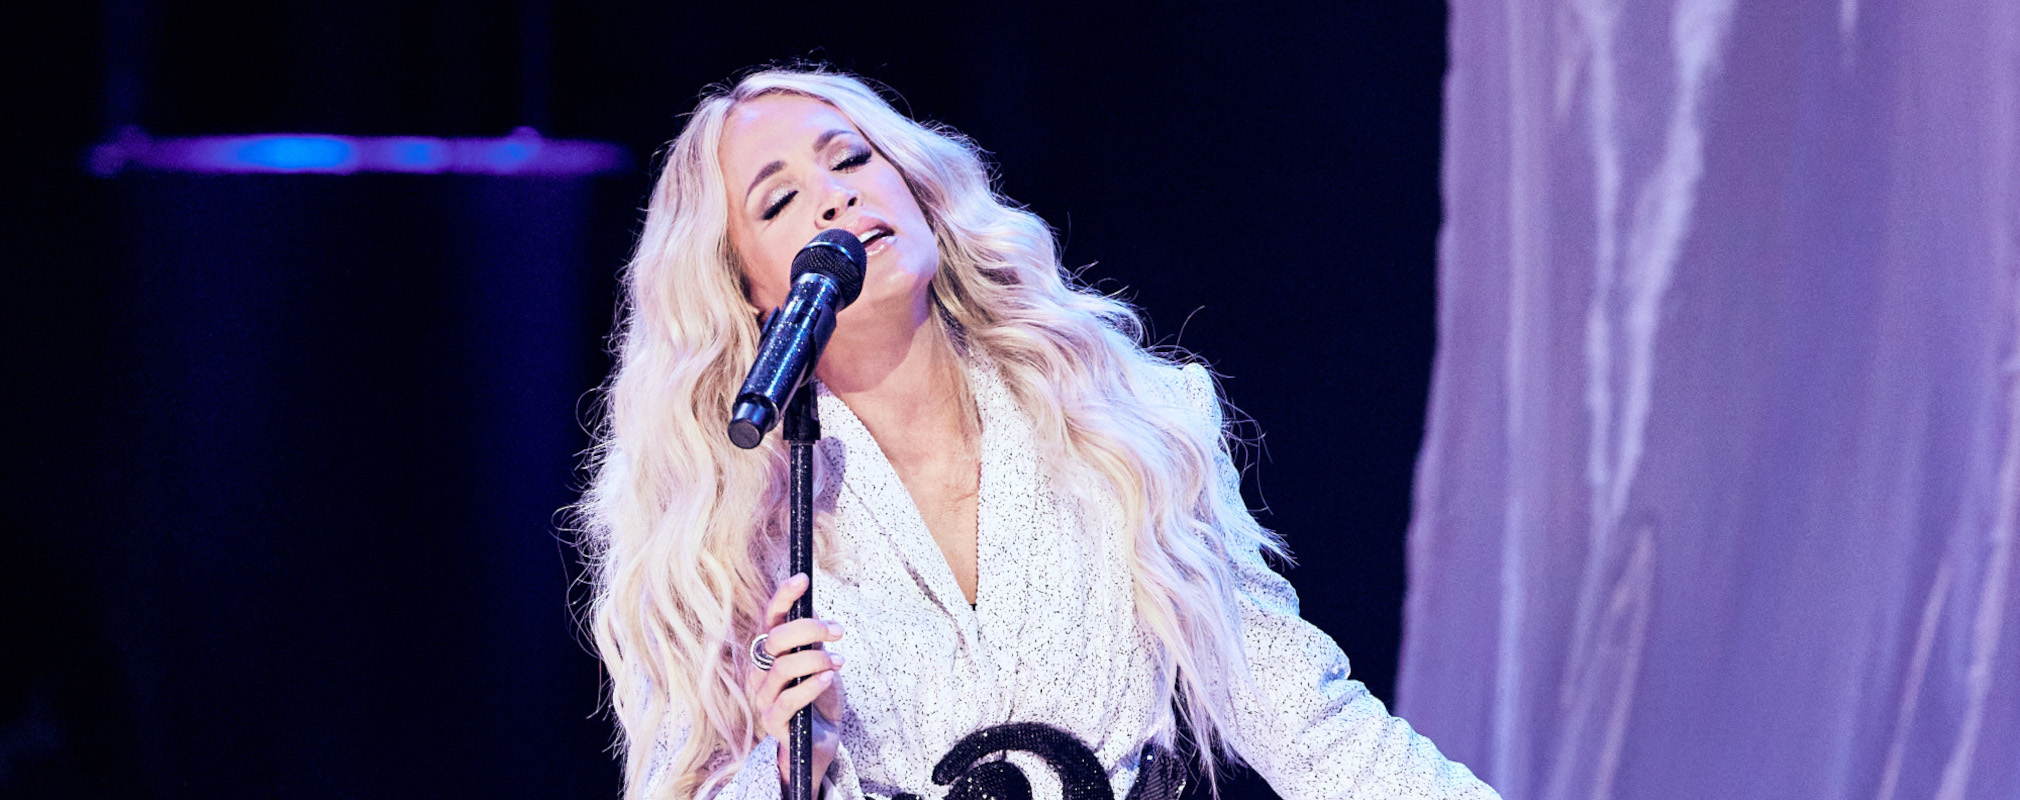 Carrie Underwood Takes Home Top Award; Performs with NeedtoBreathe at CMT Awards